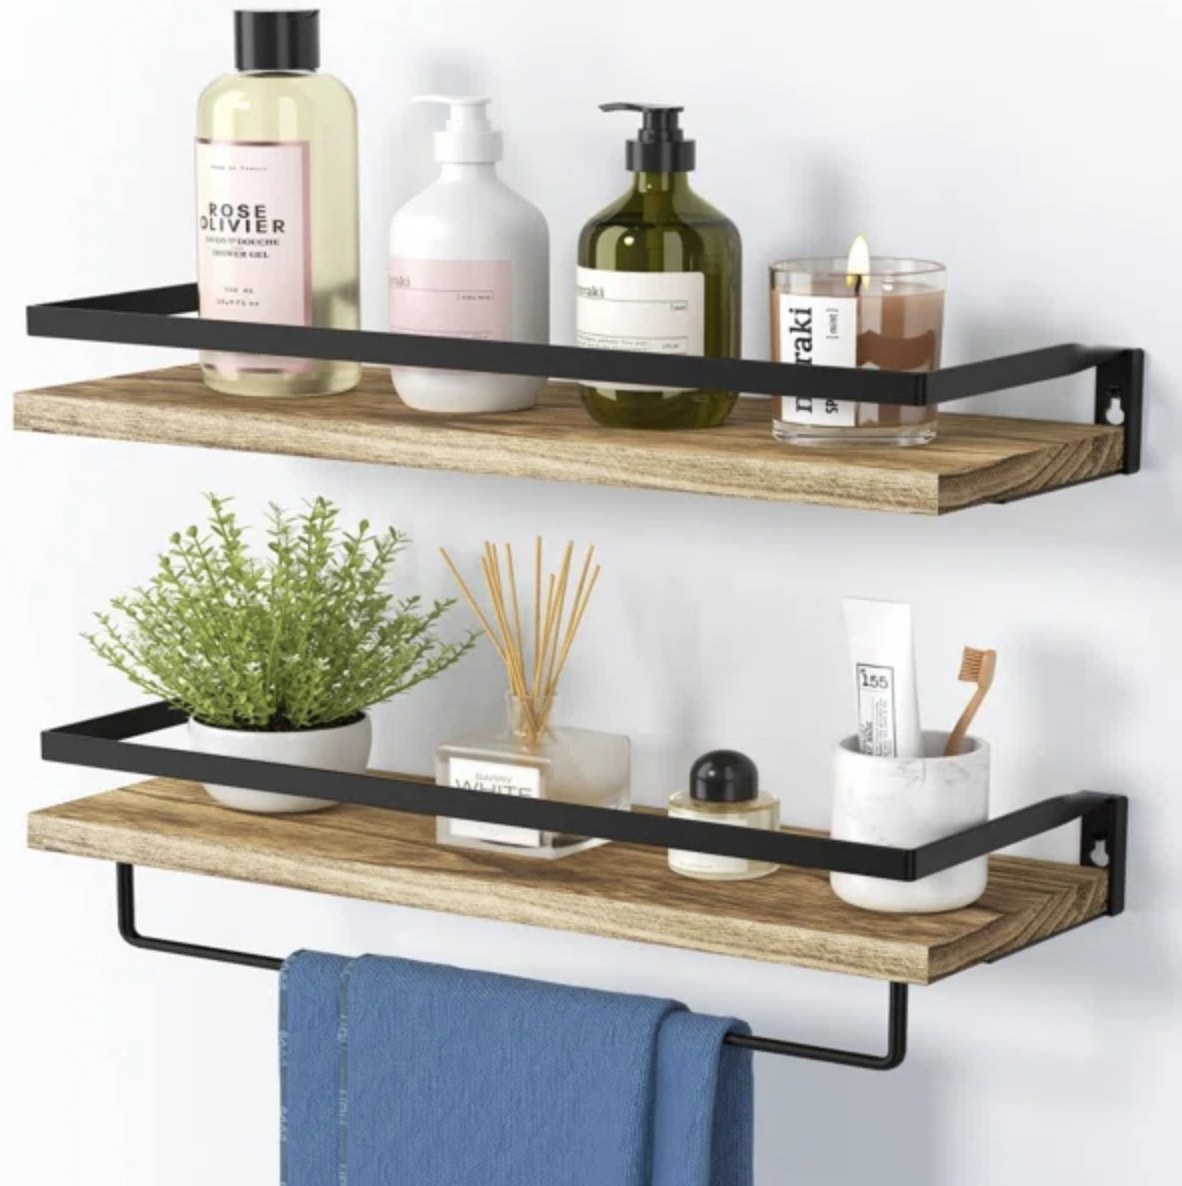 There are two floating shelves with light wood and black metal detailing